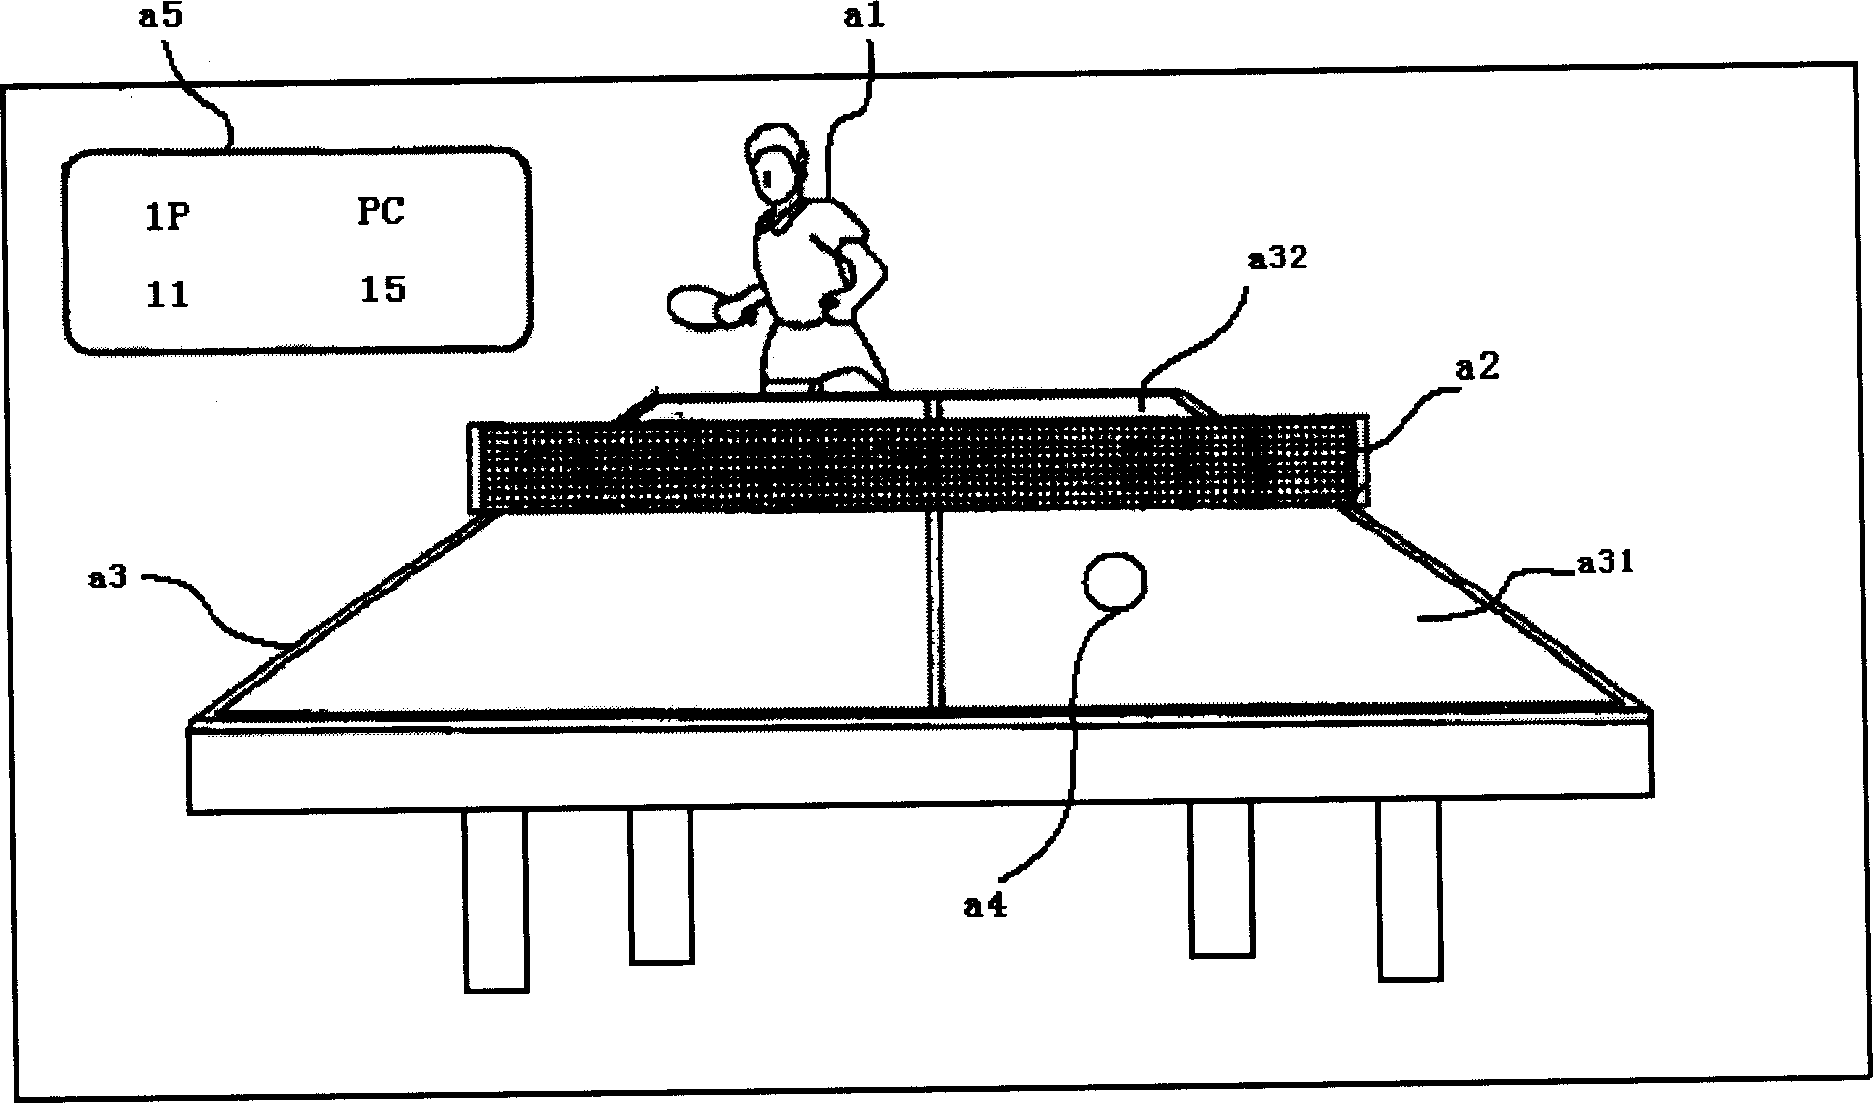 Physical training game device